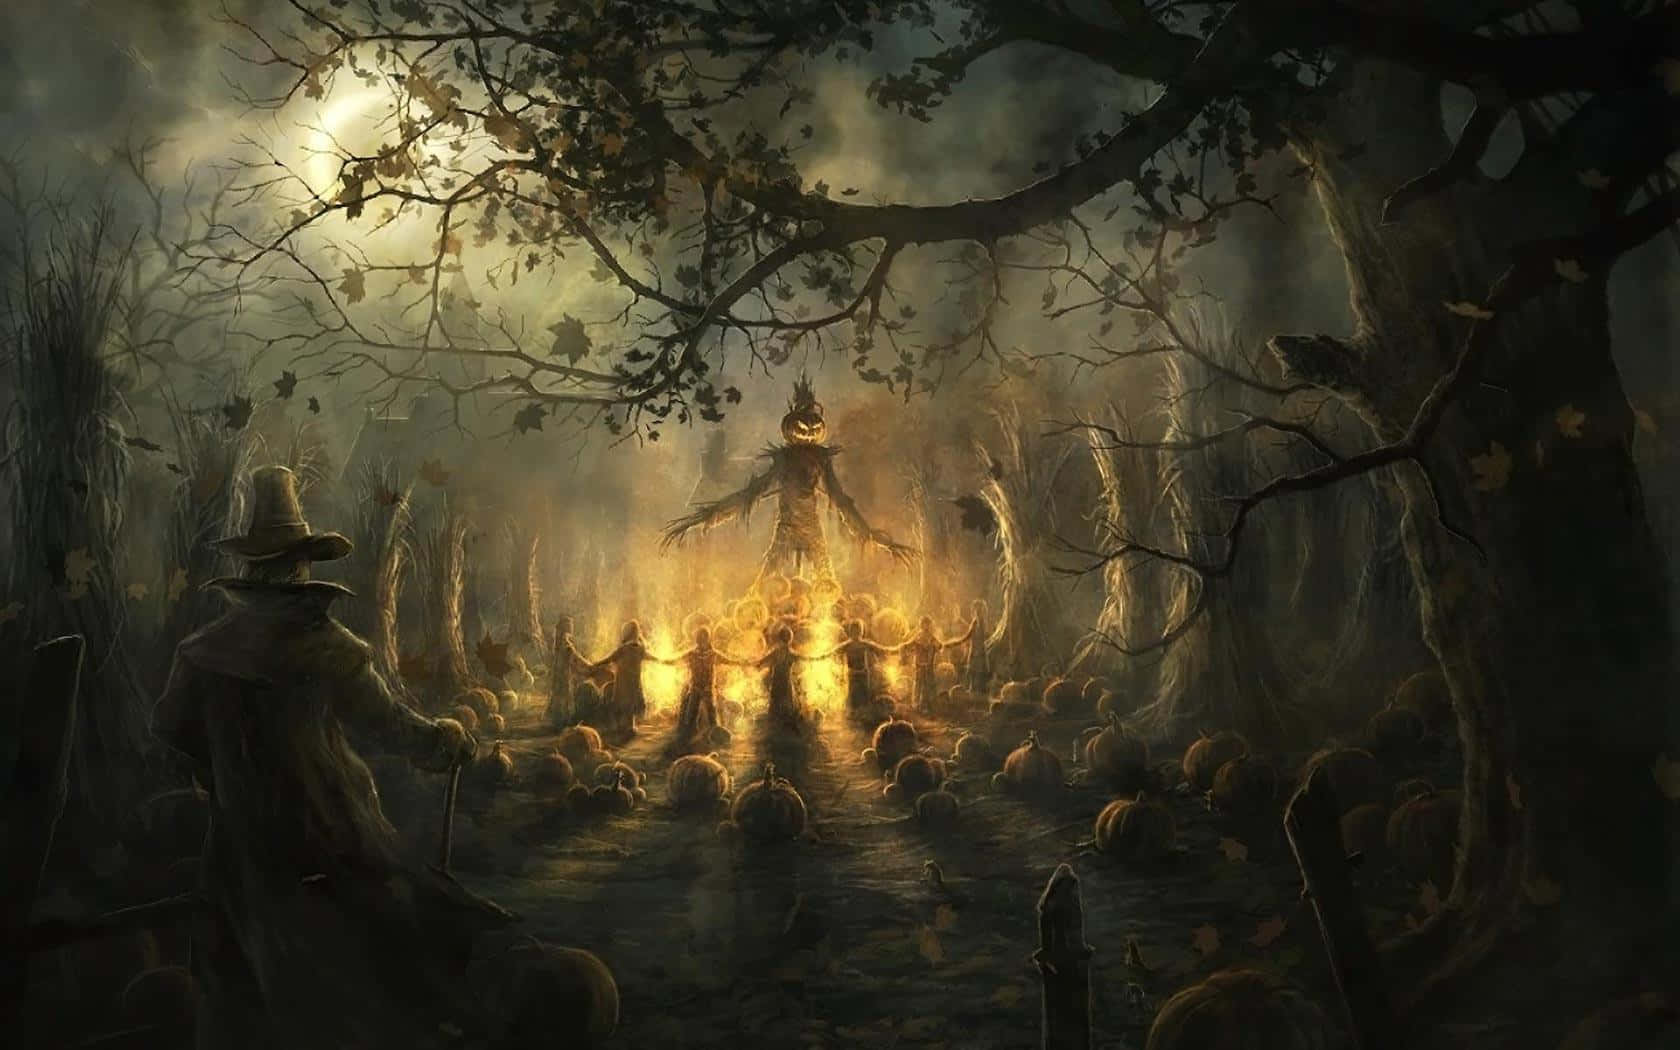 Explore the unknown and spooky side of nature with a trip to a haunted forest. Wallpaper